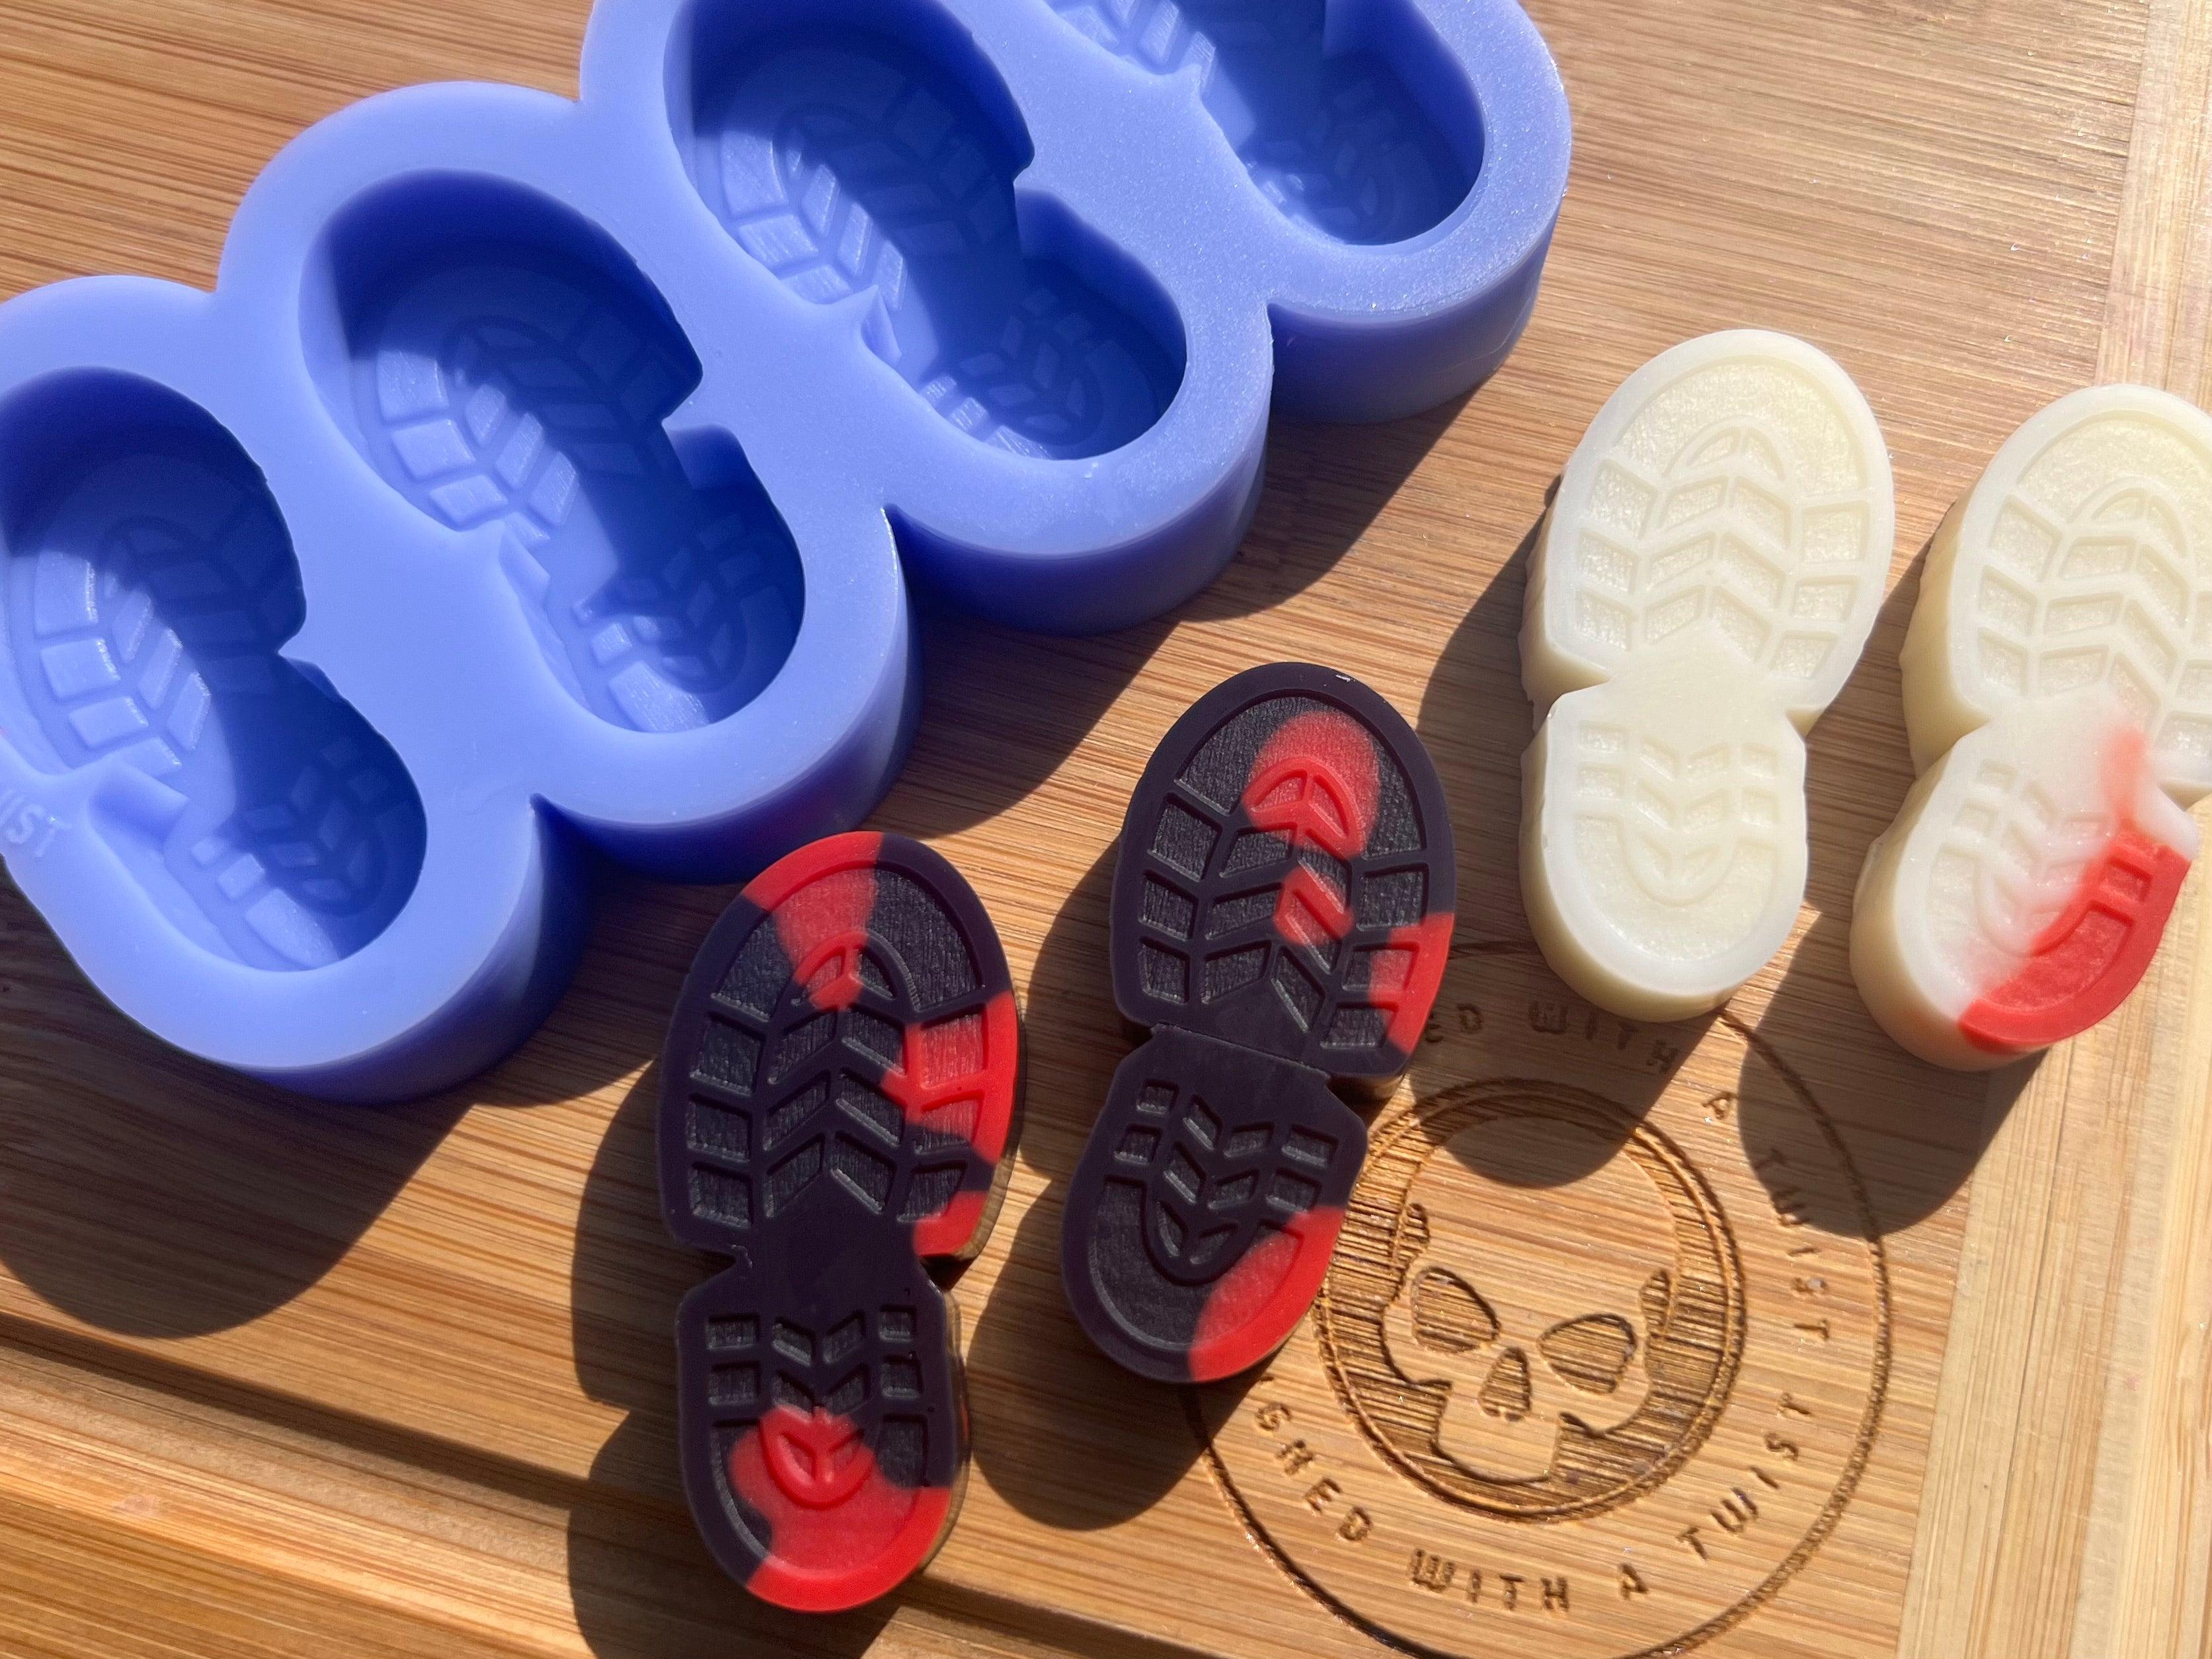 Foot Print Wax Melt Silicone Mold - Designed with a Twist - Top quality silicone molds made in the UK.